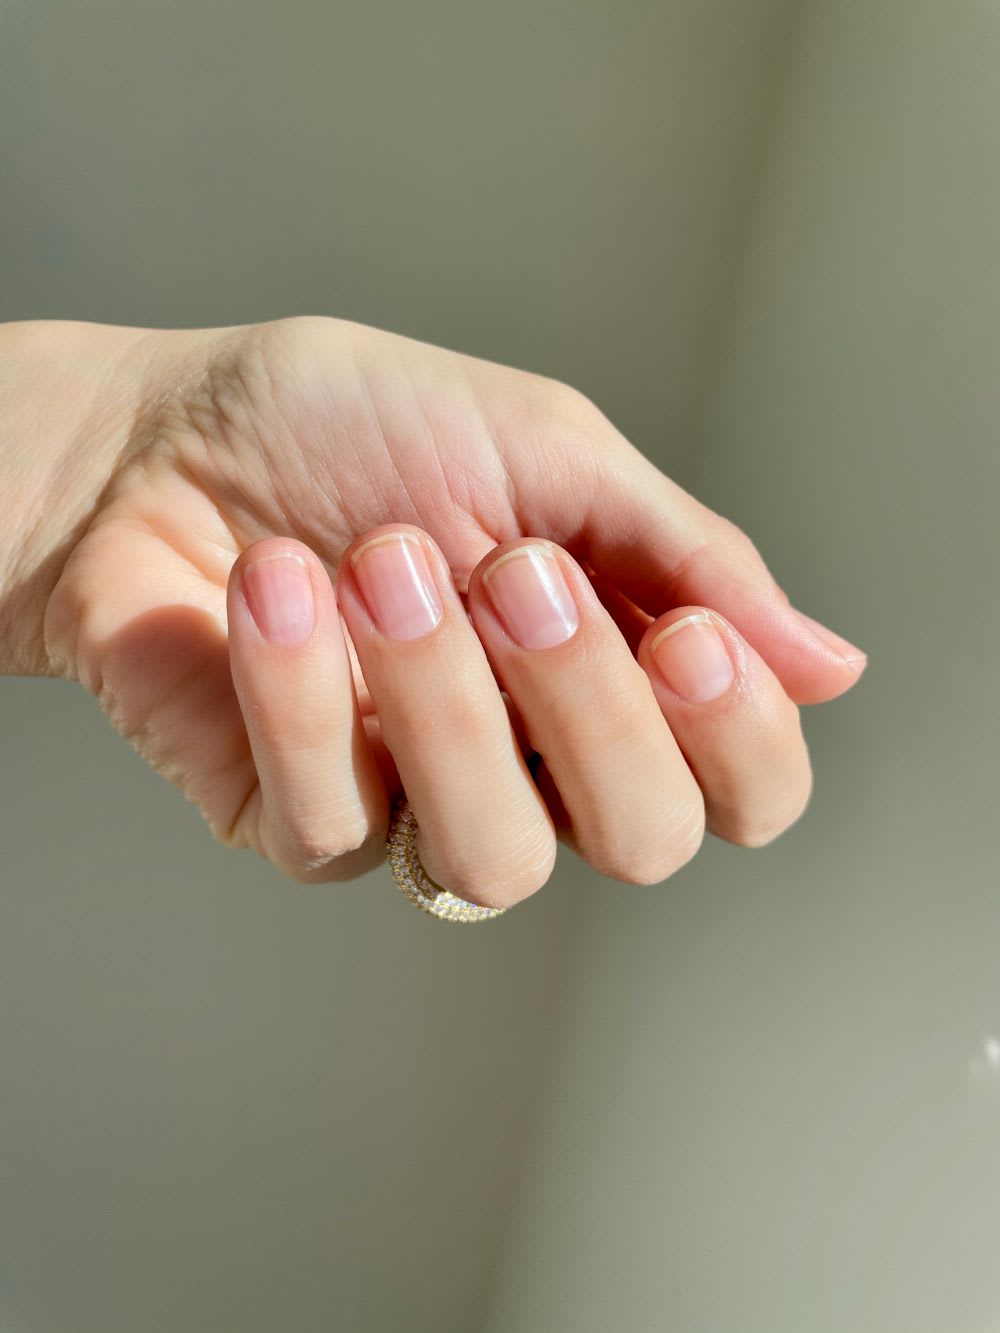 How To Get The Clean Girl Aesthetic Manicure – Bio Sculpture